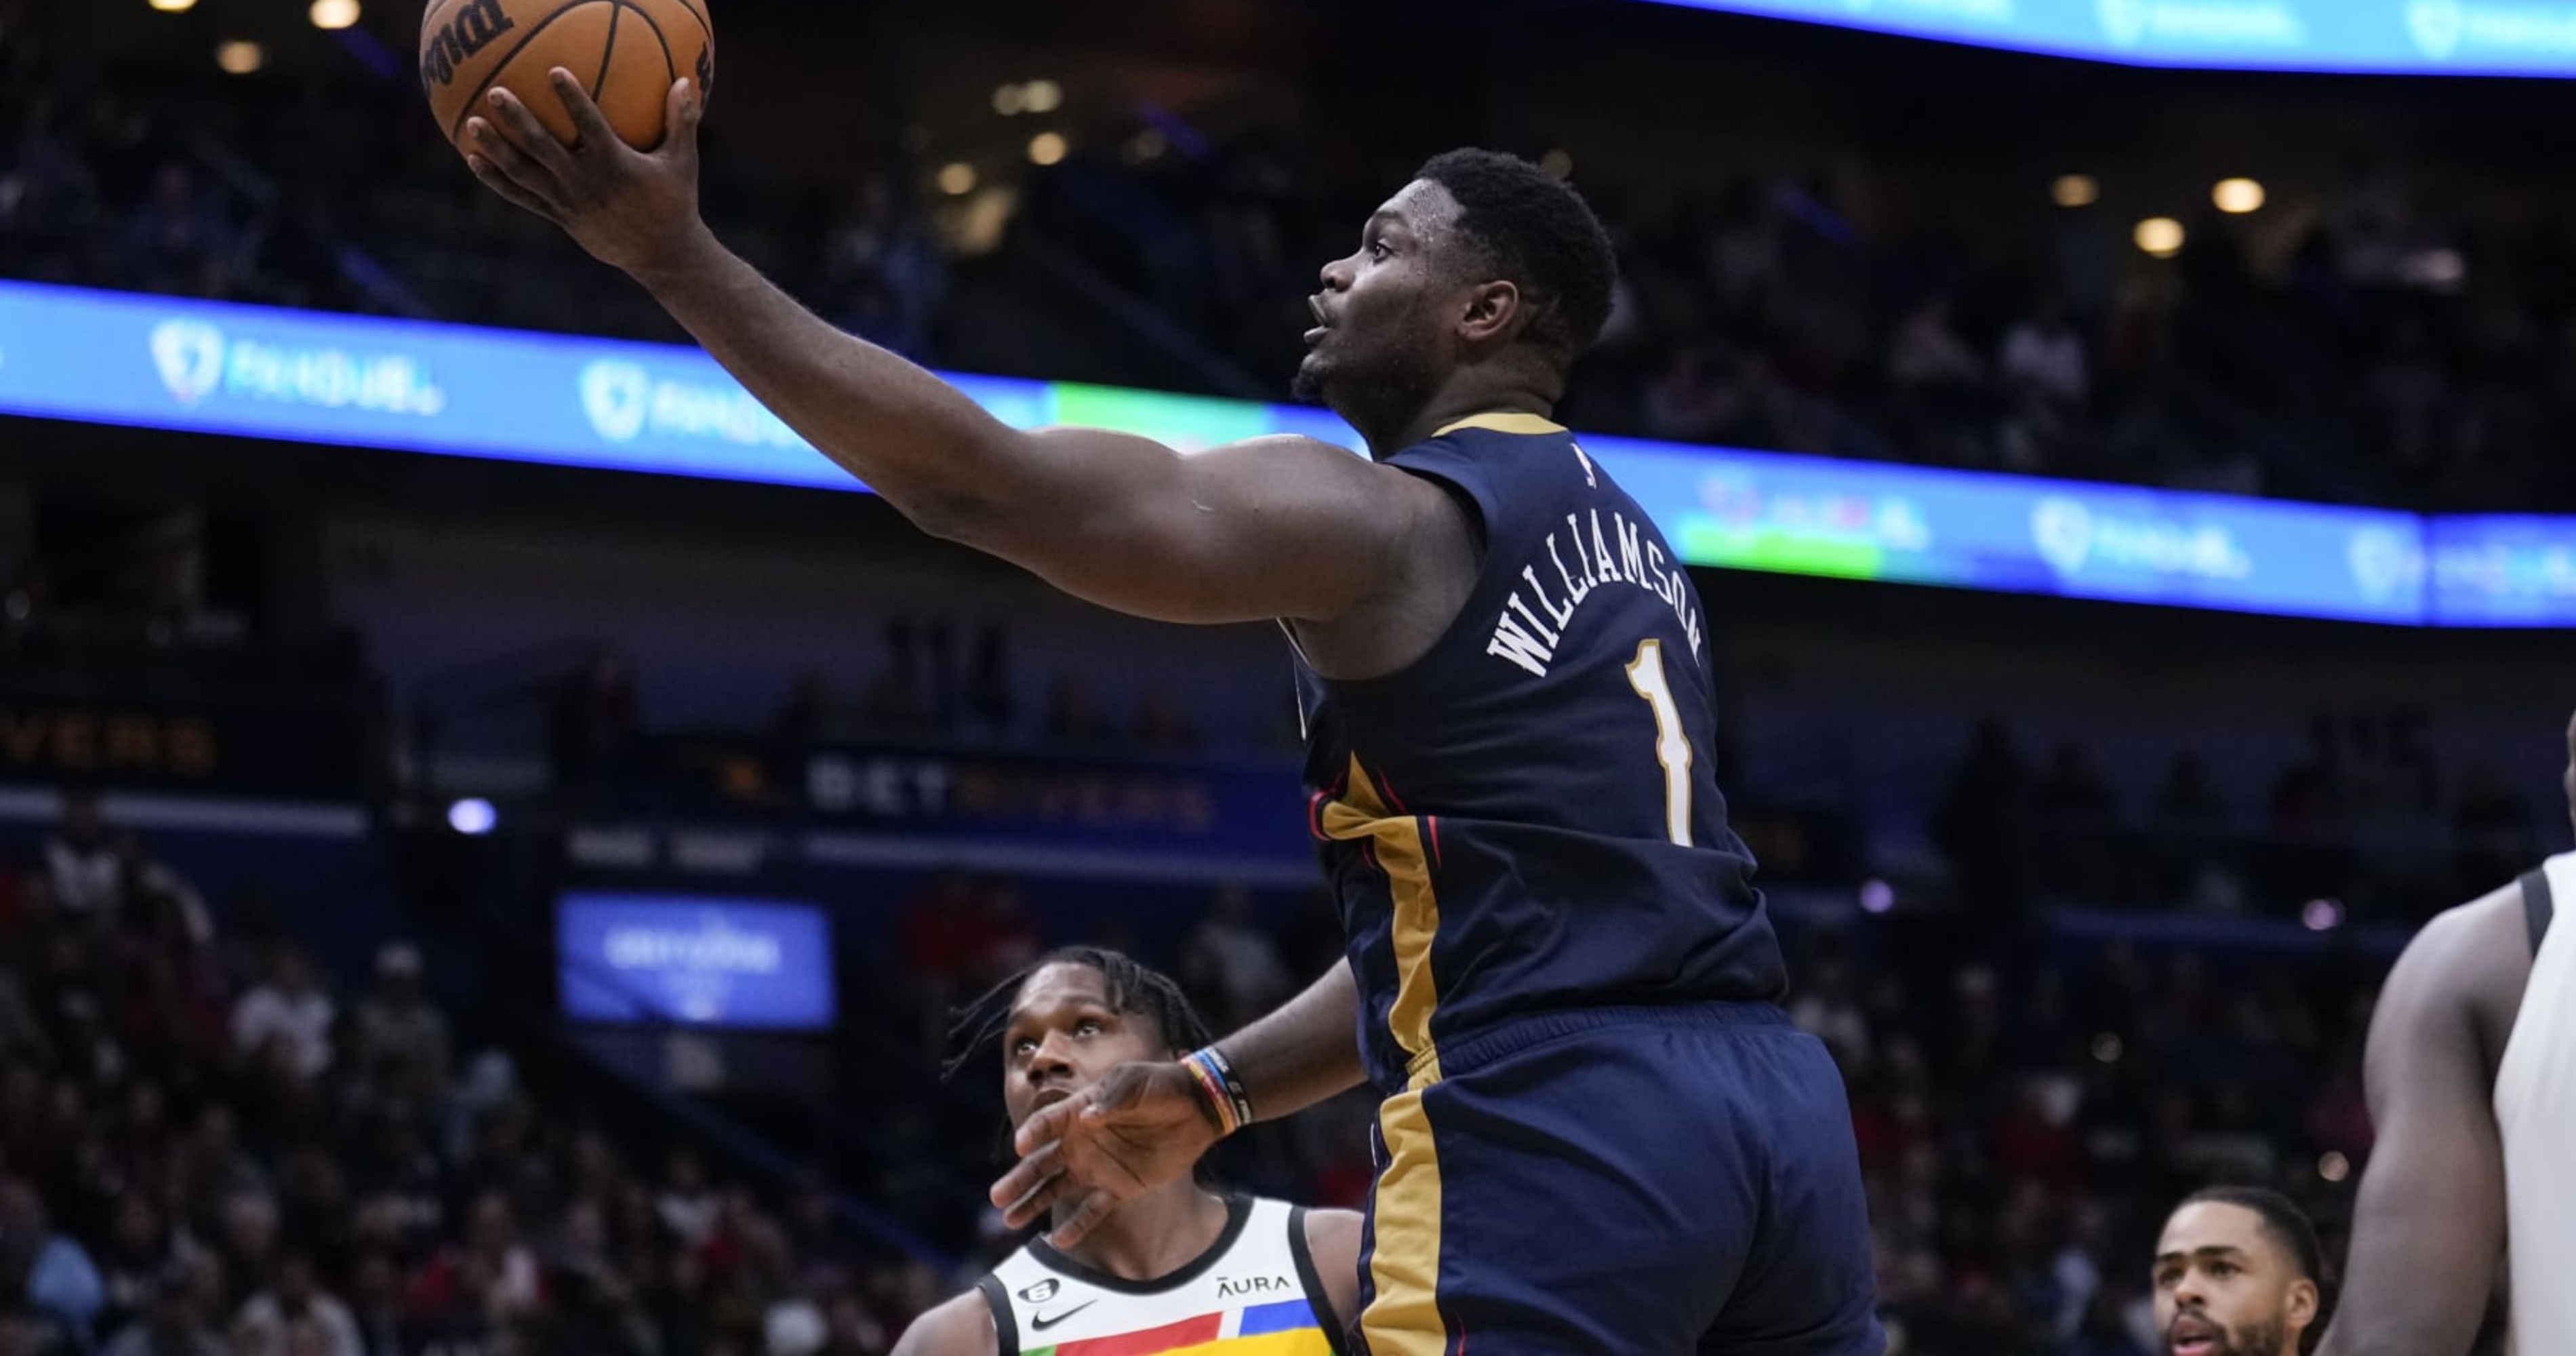 Pelicans' Zion Williamson to Miss at Least 3 Weeks with Hamstring Injury